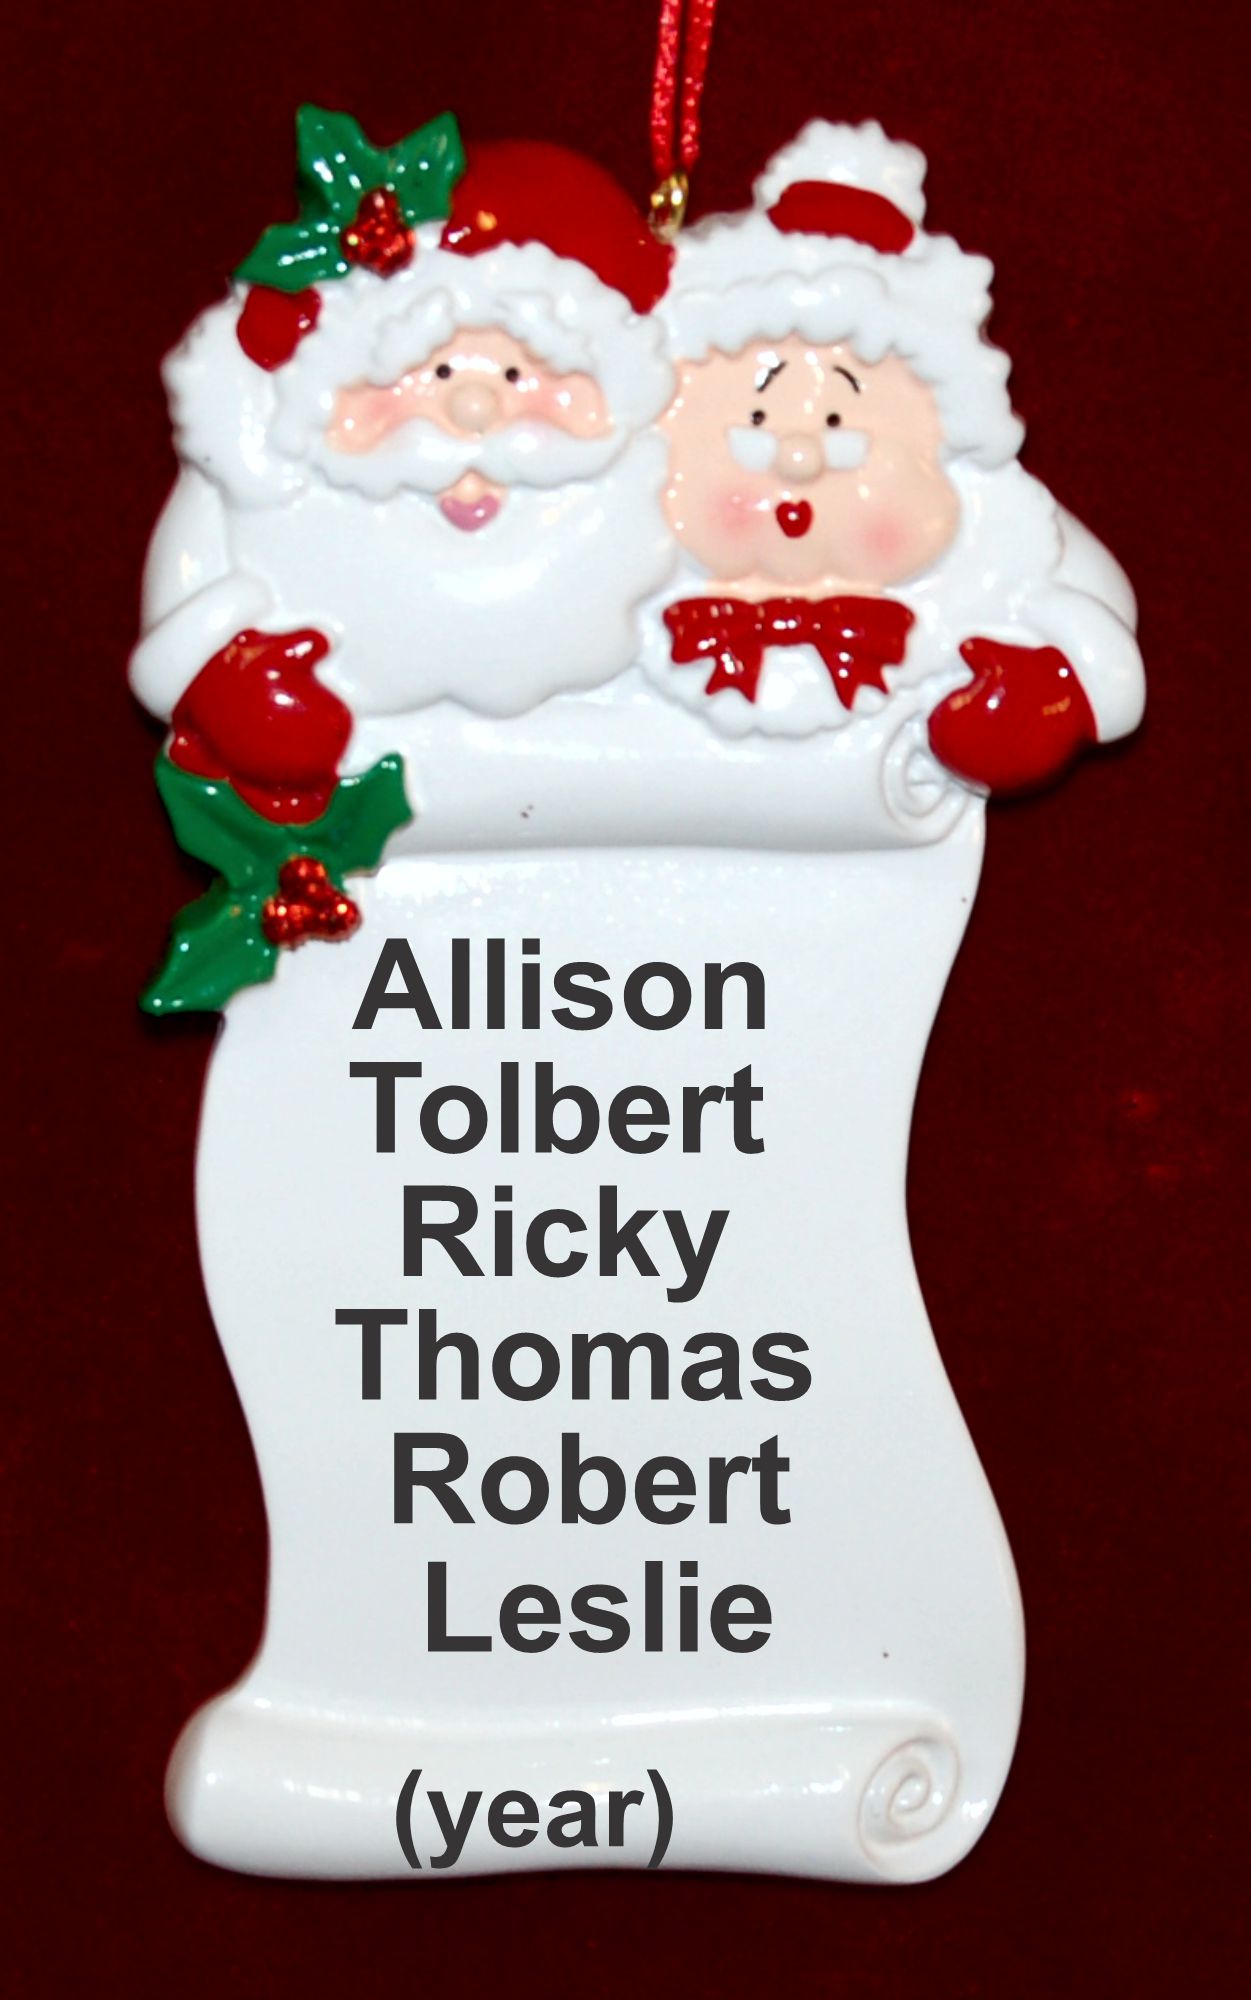 Nana's Good List Christmas Ornament up to 6 Personalized FREE by Russell Rhodes